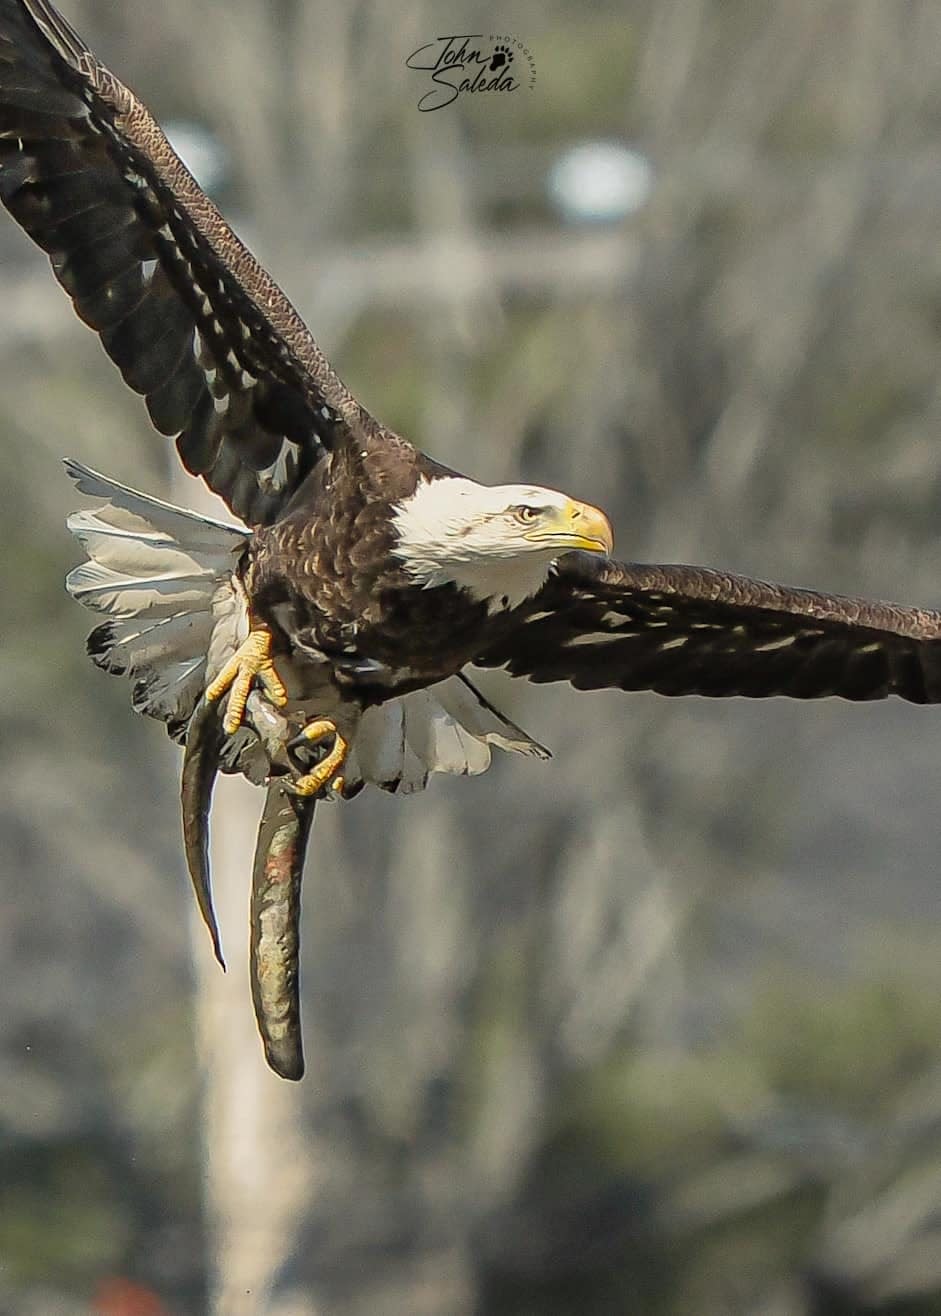 Local photographer John Saleda has been gaining attention in Exeter for his action shots of the eagles that live along the river by Swasey Parkway.